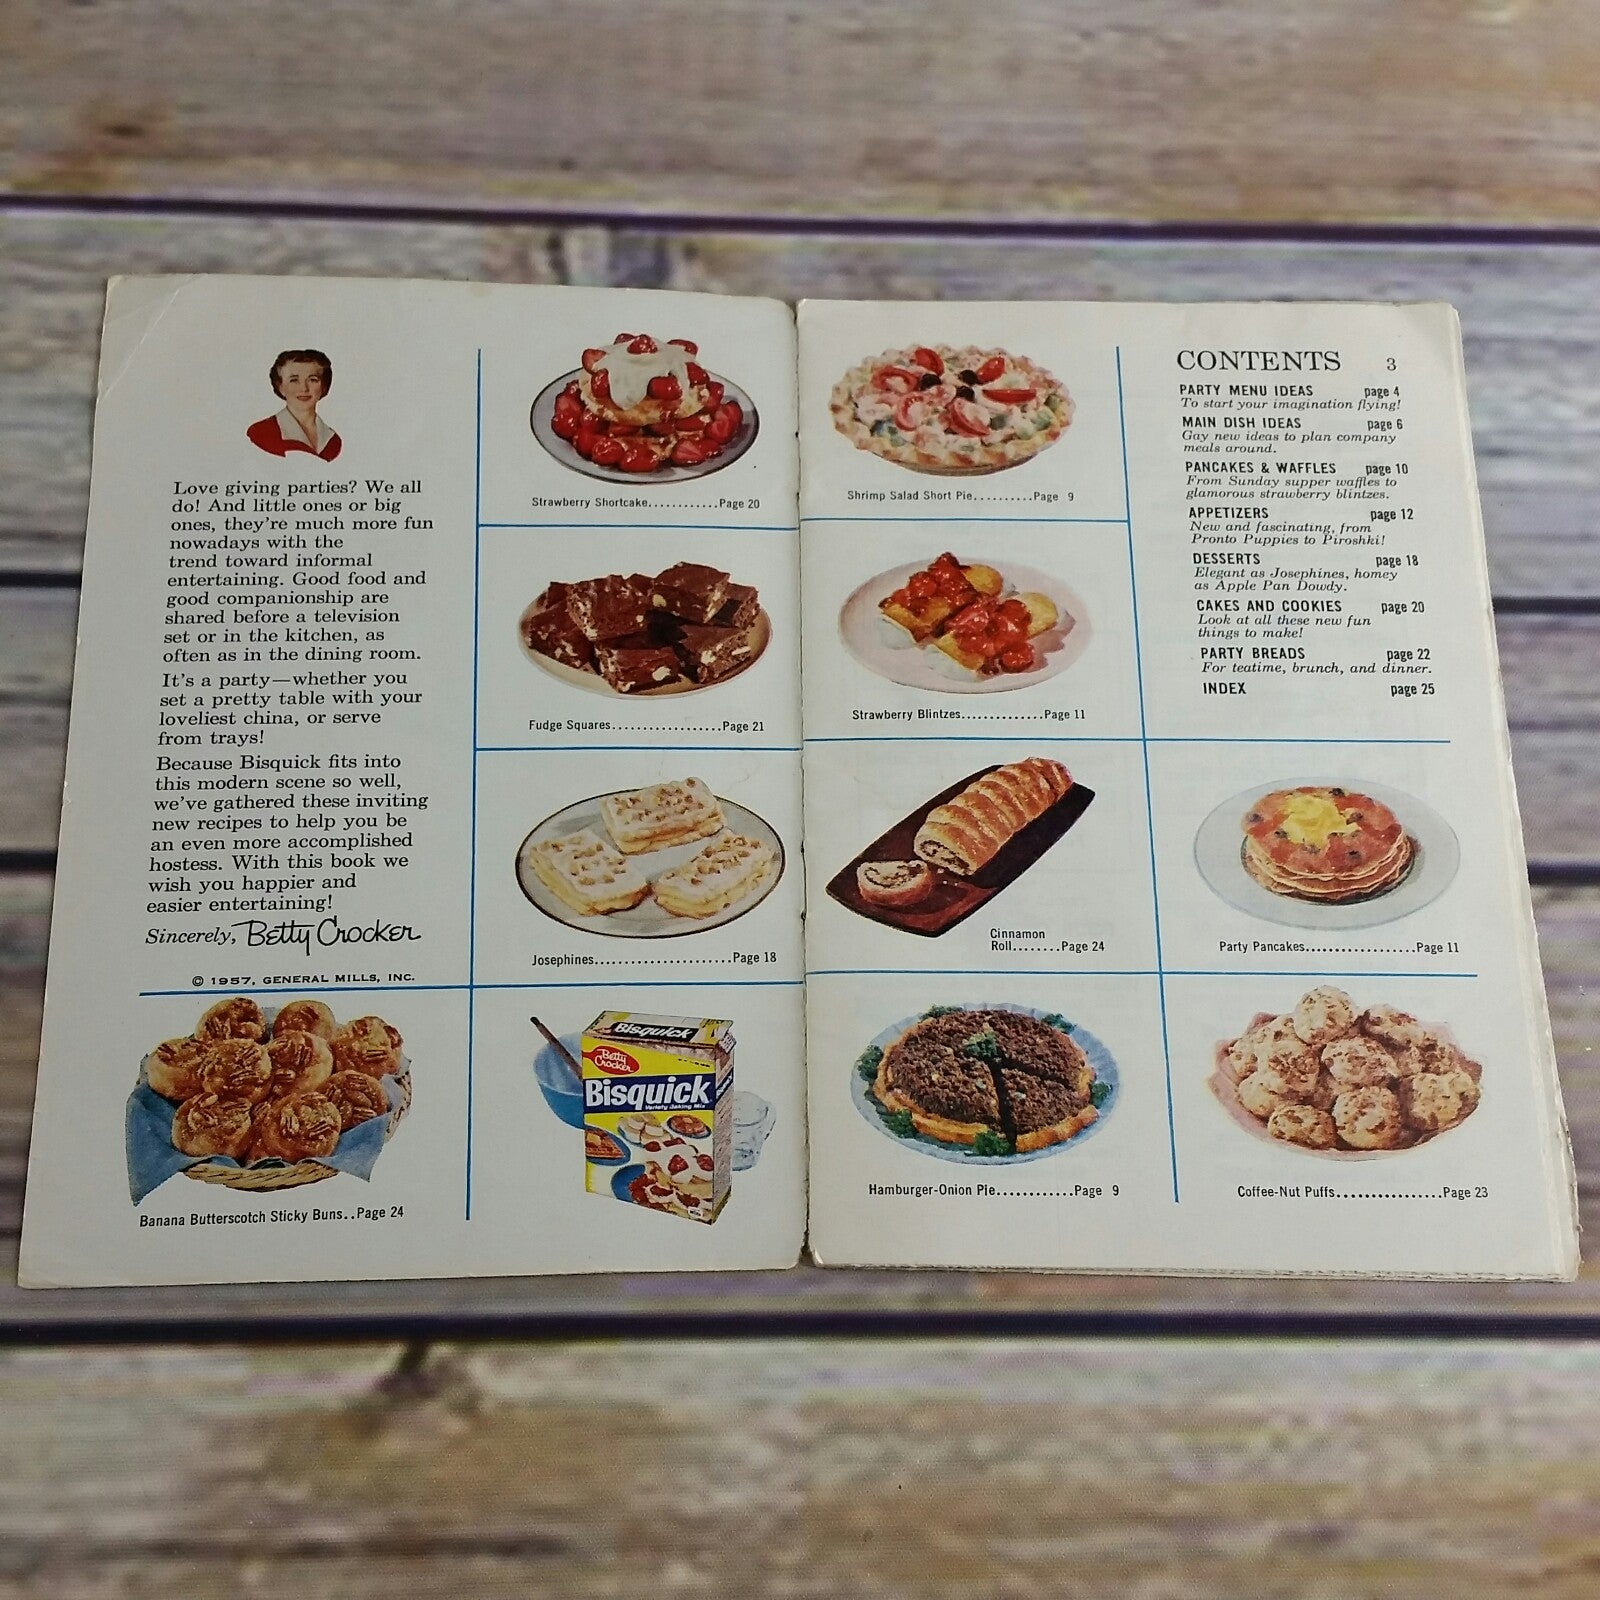 Vintage Cookbook Betty Crocker Bisquick Party Book Recipes 1957 Promo Paperback Booklet - At Grandma's Table